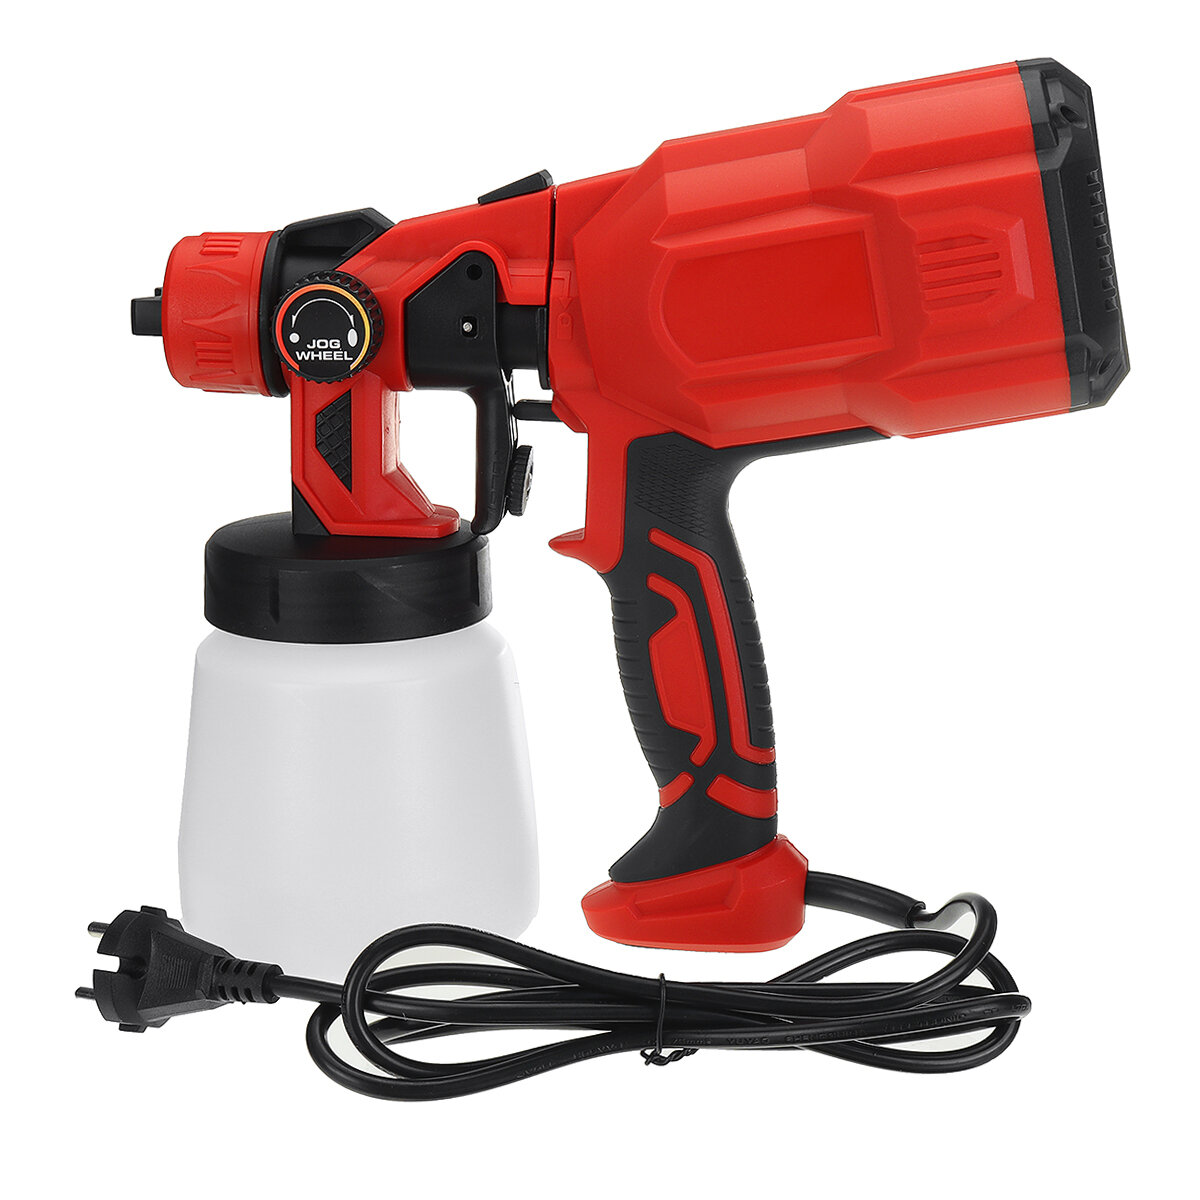 Removable Electric Paint Spray Guns High Pressure Gravity Feed Kit Speed Regulator Paint Tools Prime